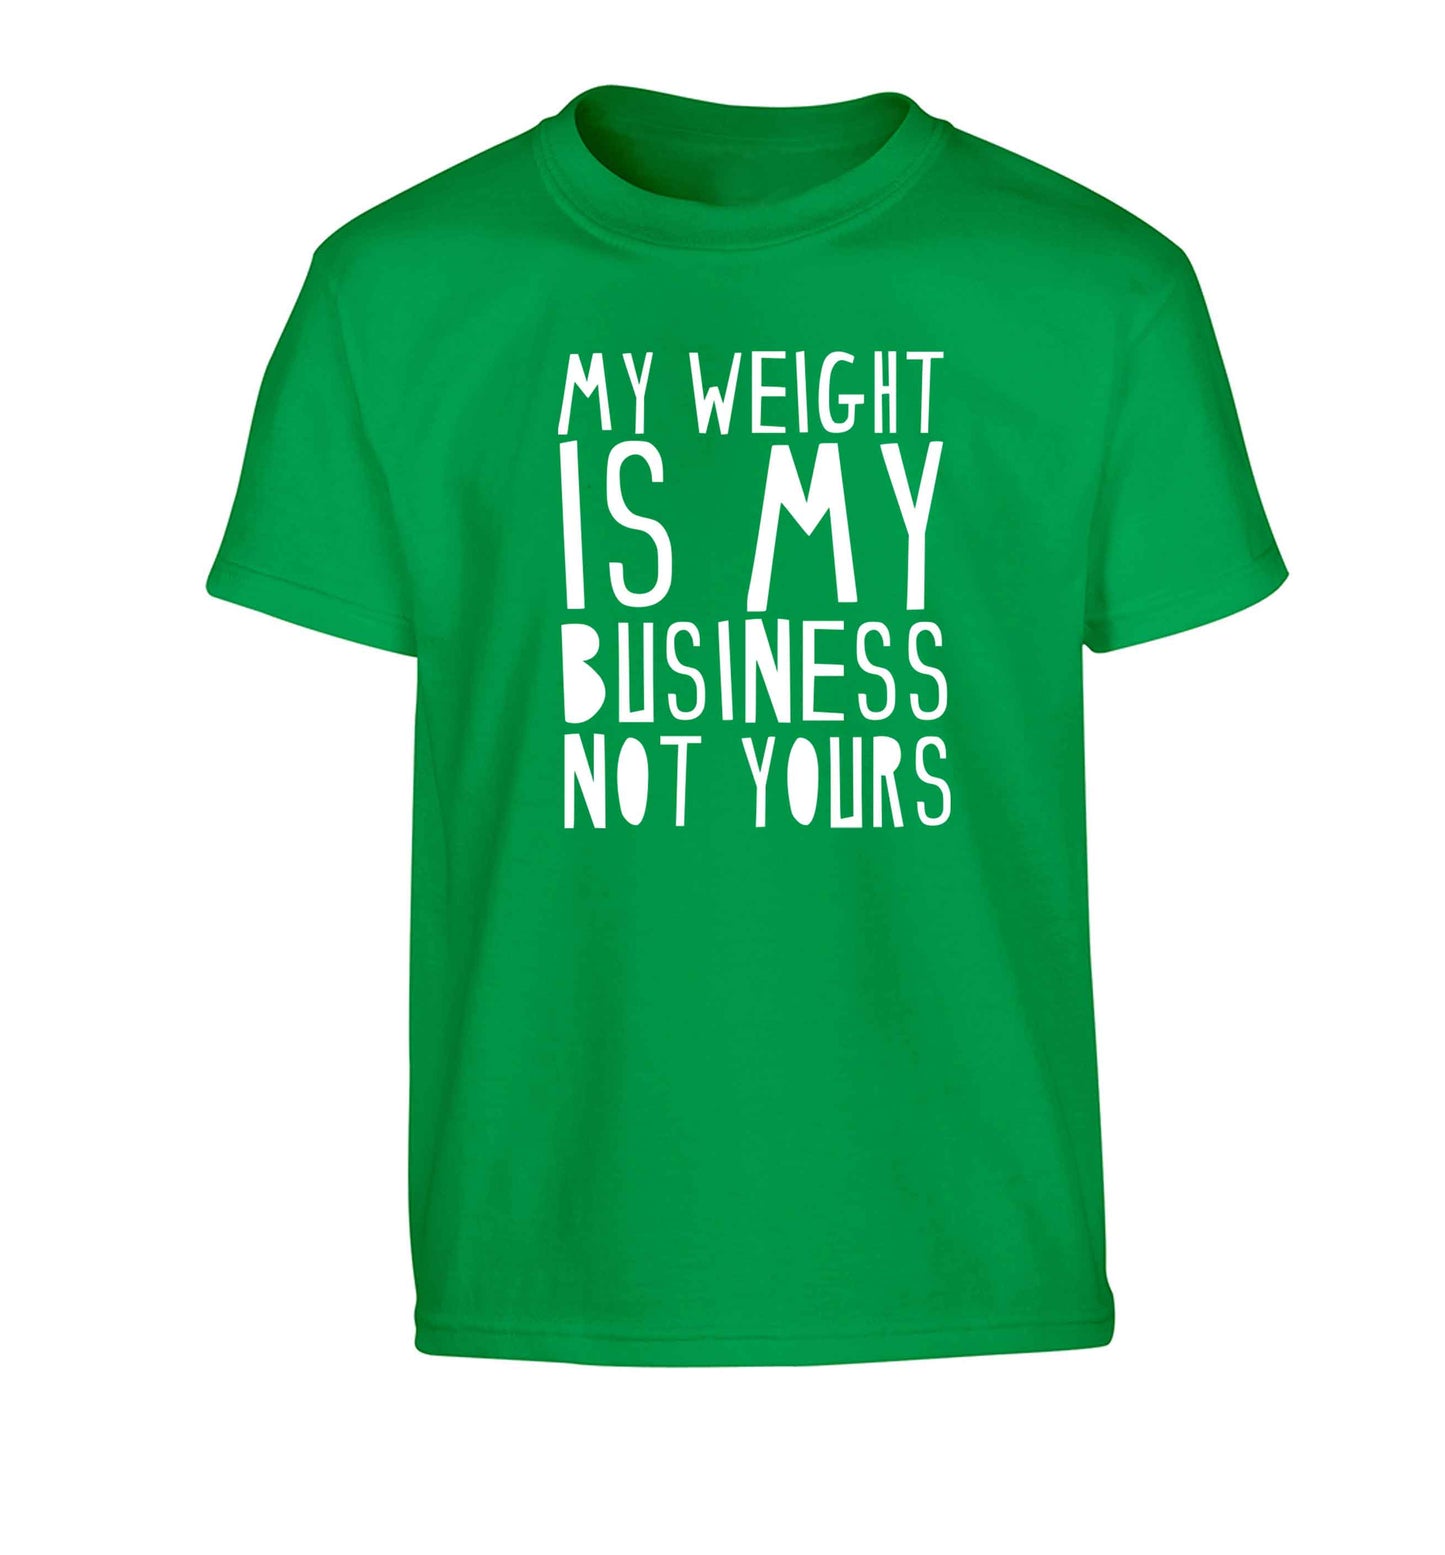 My weight is my business not yours Children's green Tshirt 12-13 Years